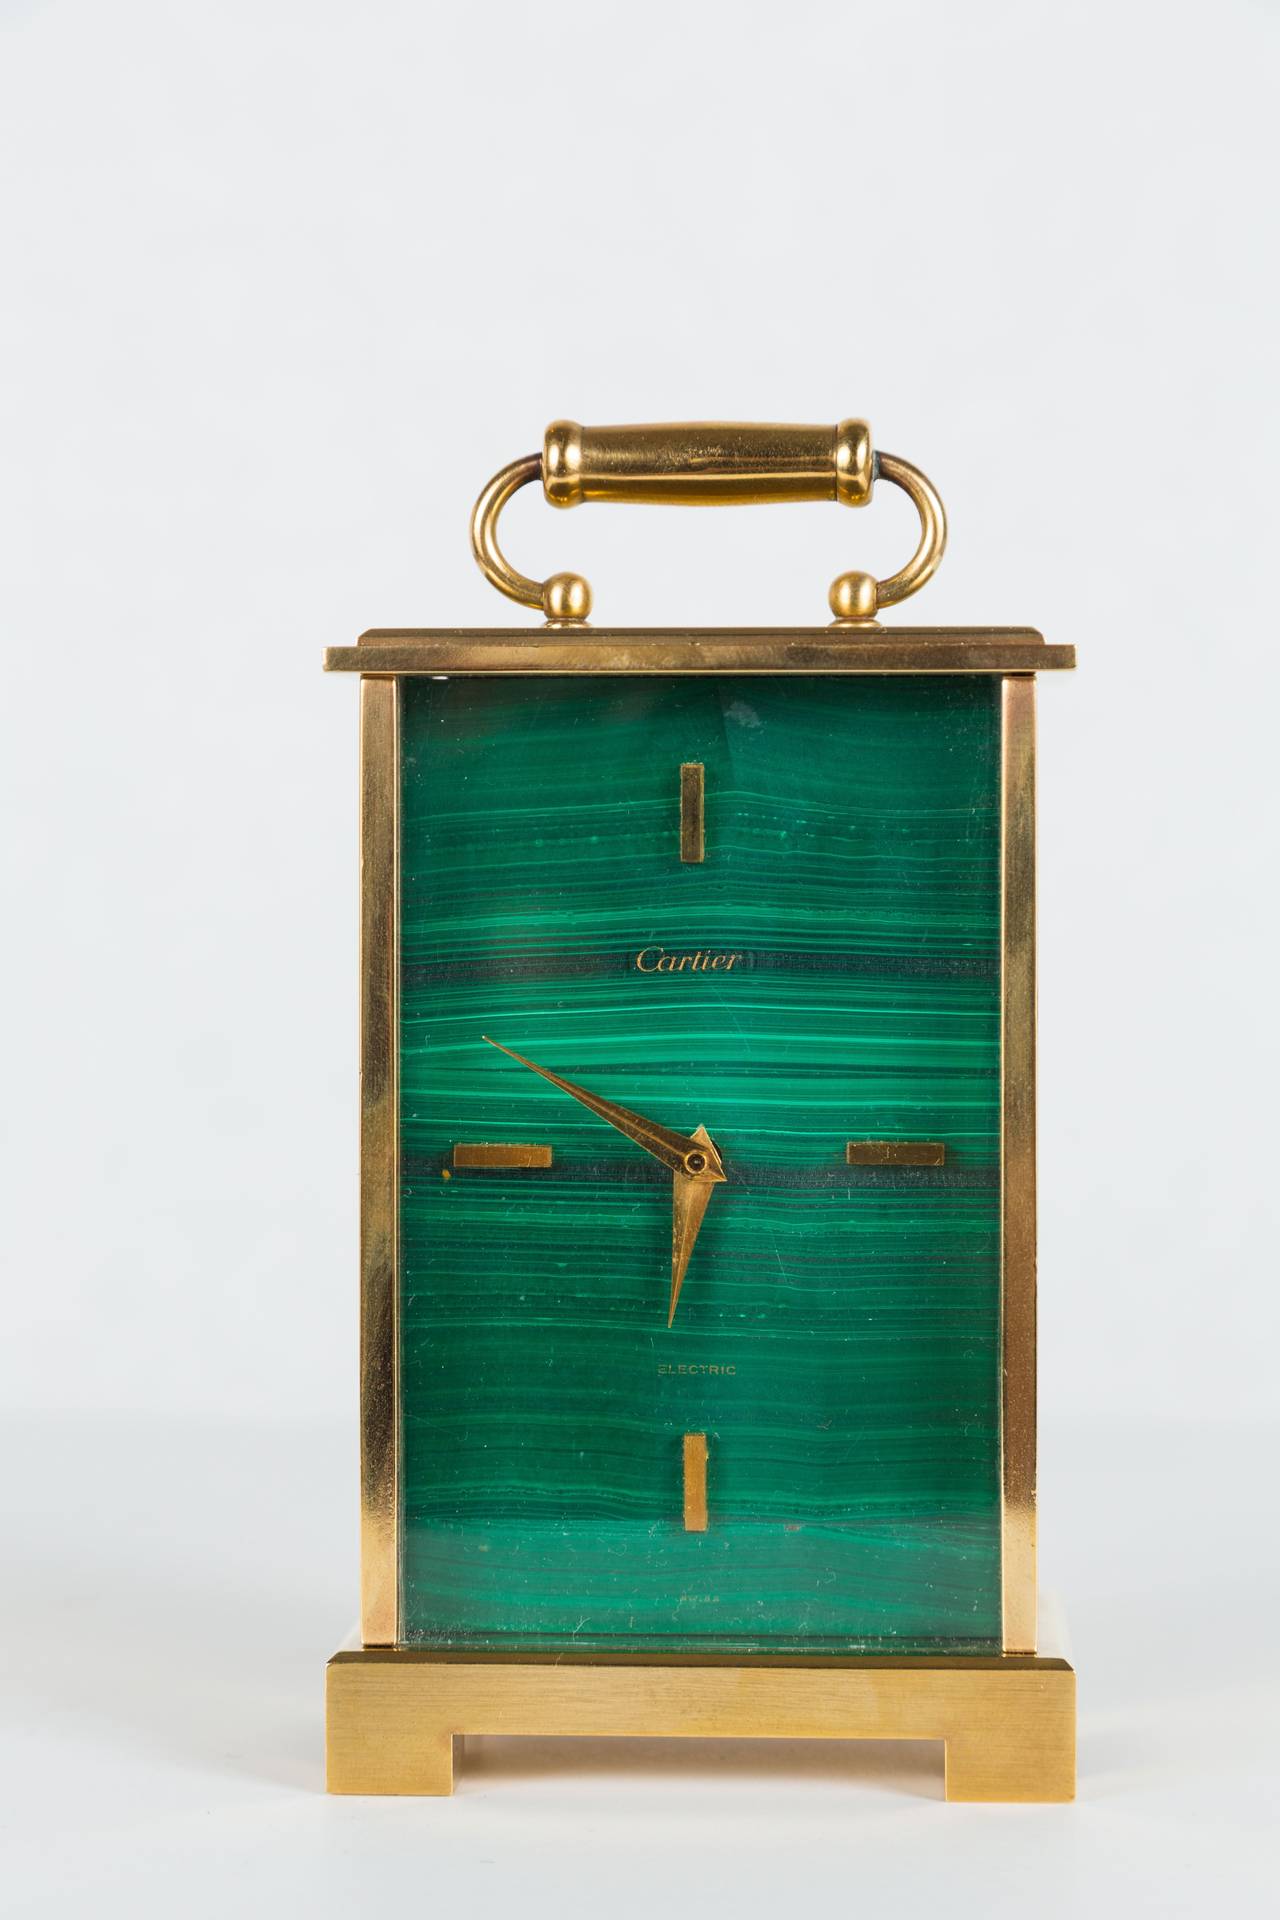 Handsome Art Deco carriage style desk clock by Cartier in brass with brass details and a malachite face. Clock is battery operated, but it appears the movement has been replaced at some point. 

Height of case is 4 7/8